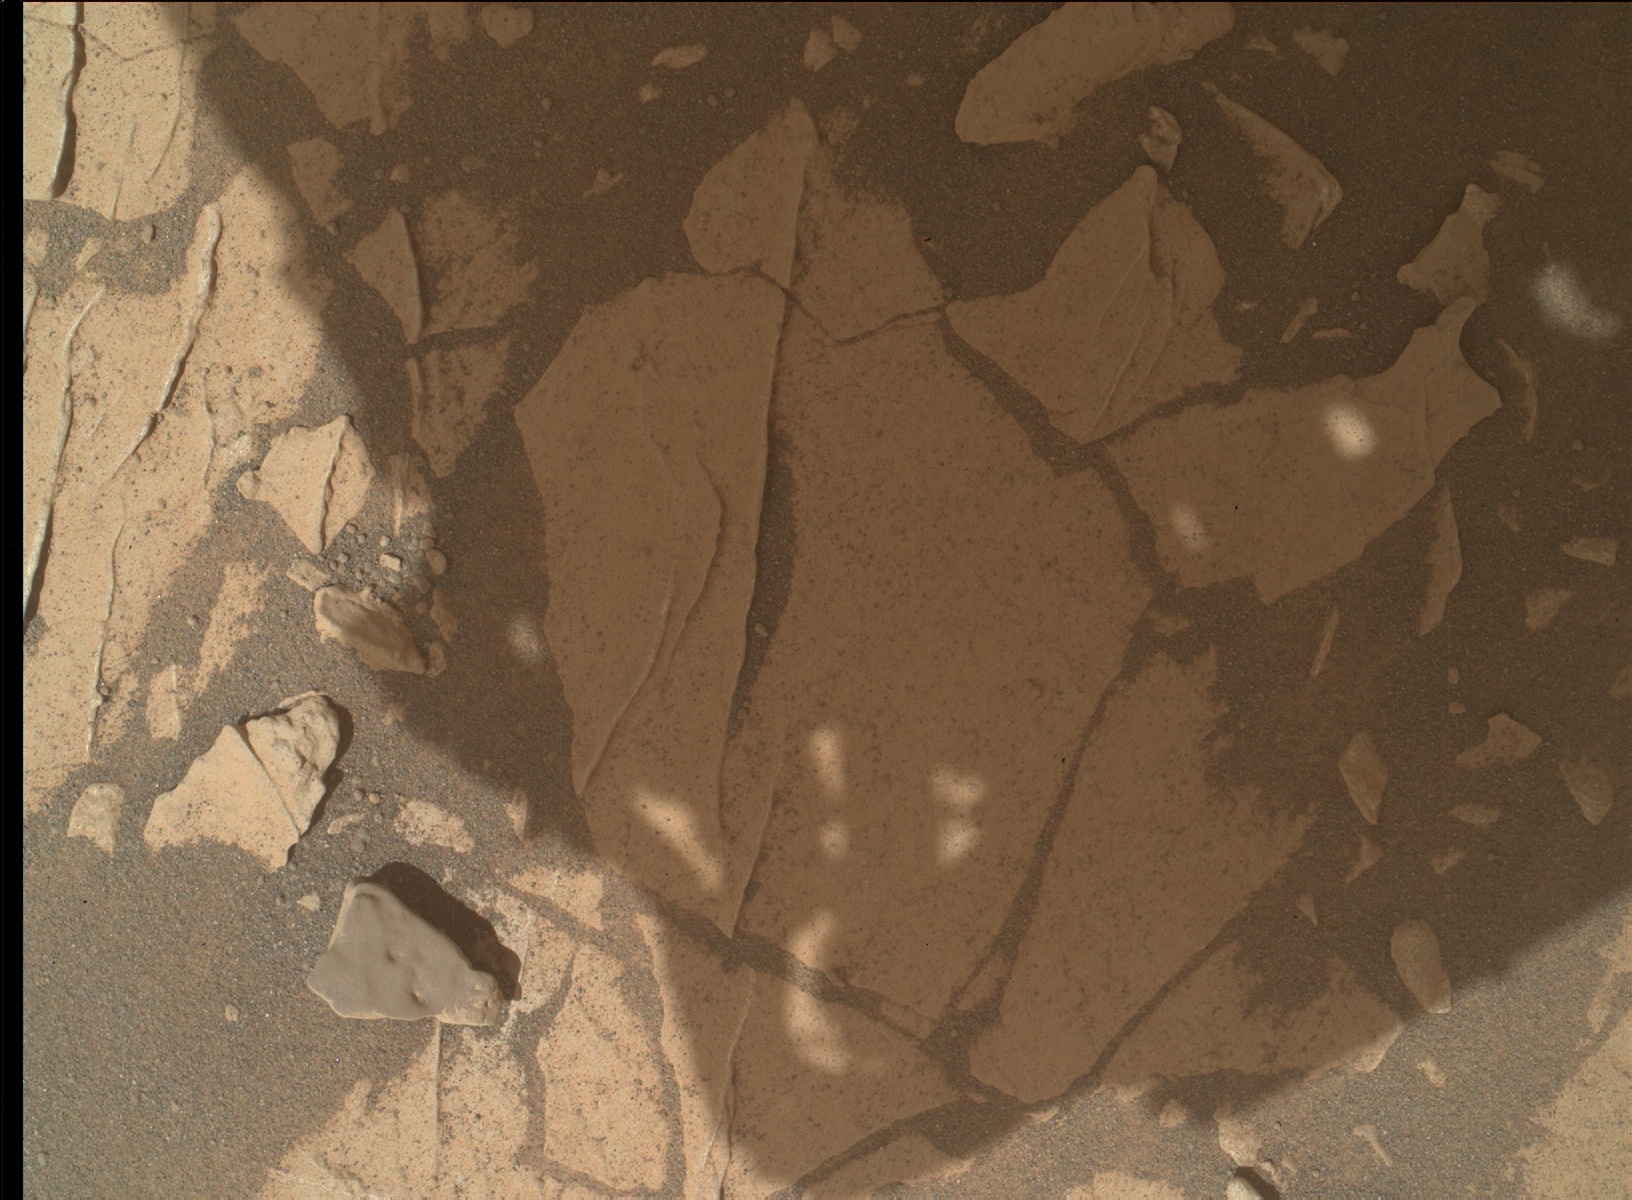 Nasa's Mars rover Curiosity acquired this image using its Mars Hand Lens Imager (MAHLI) on Sol 3056